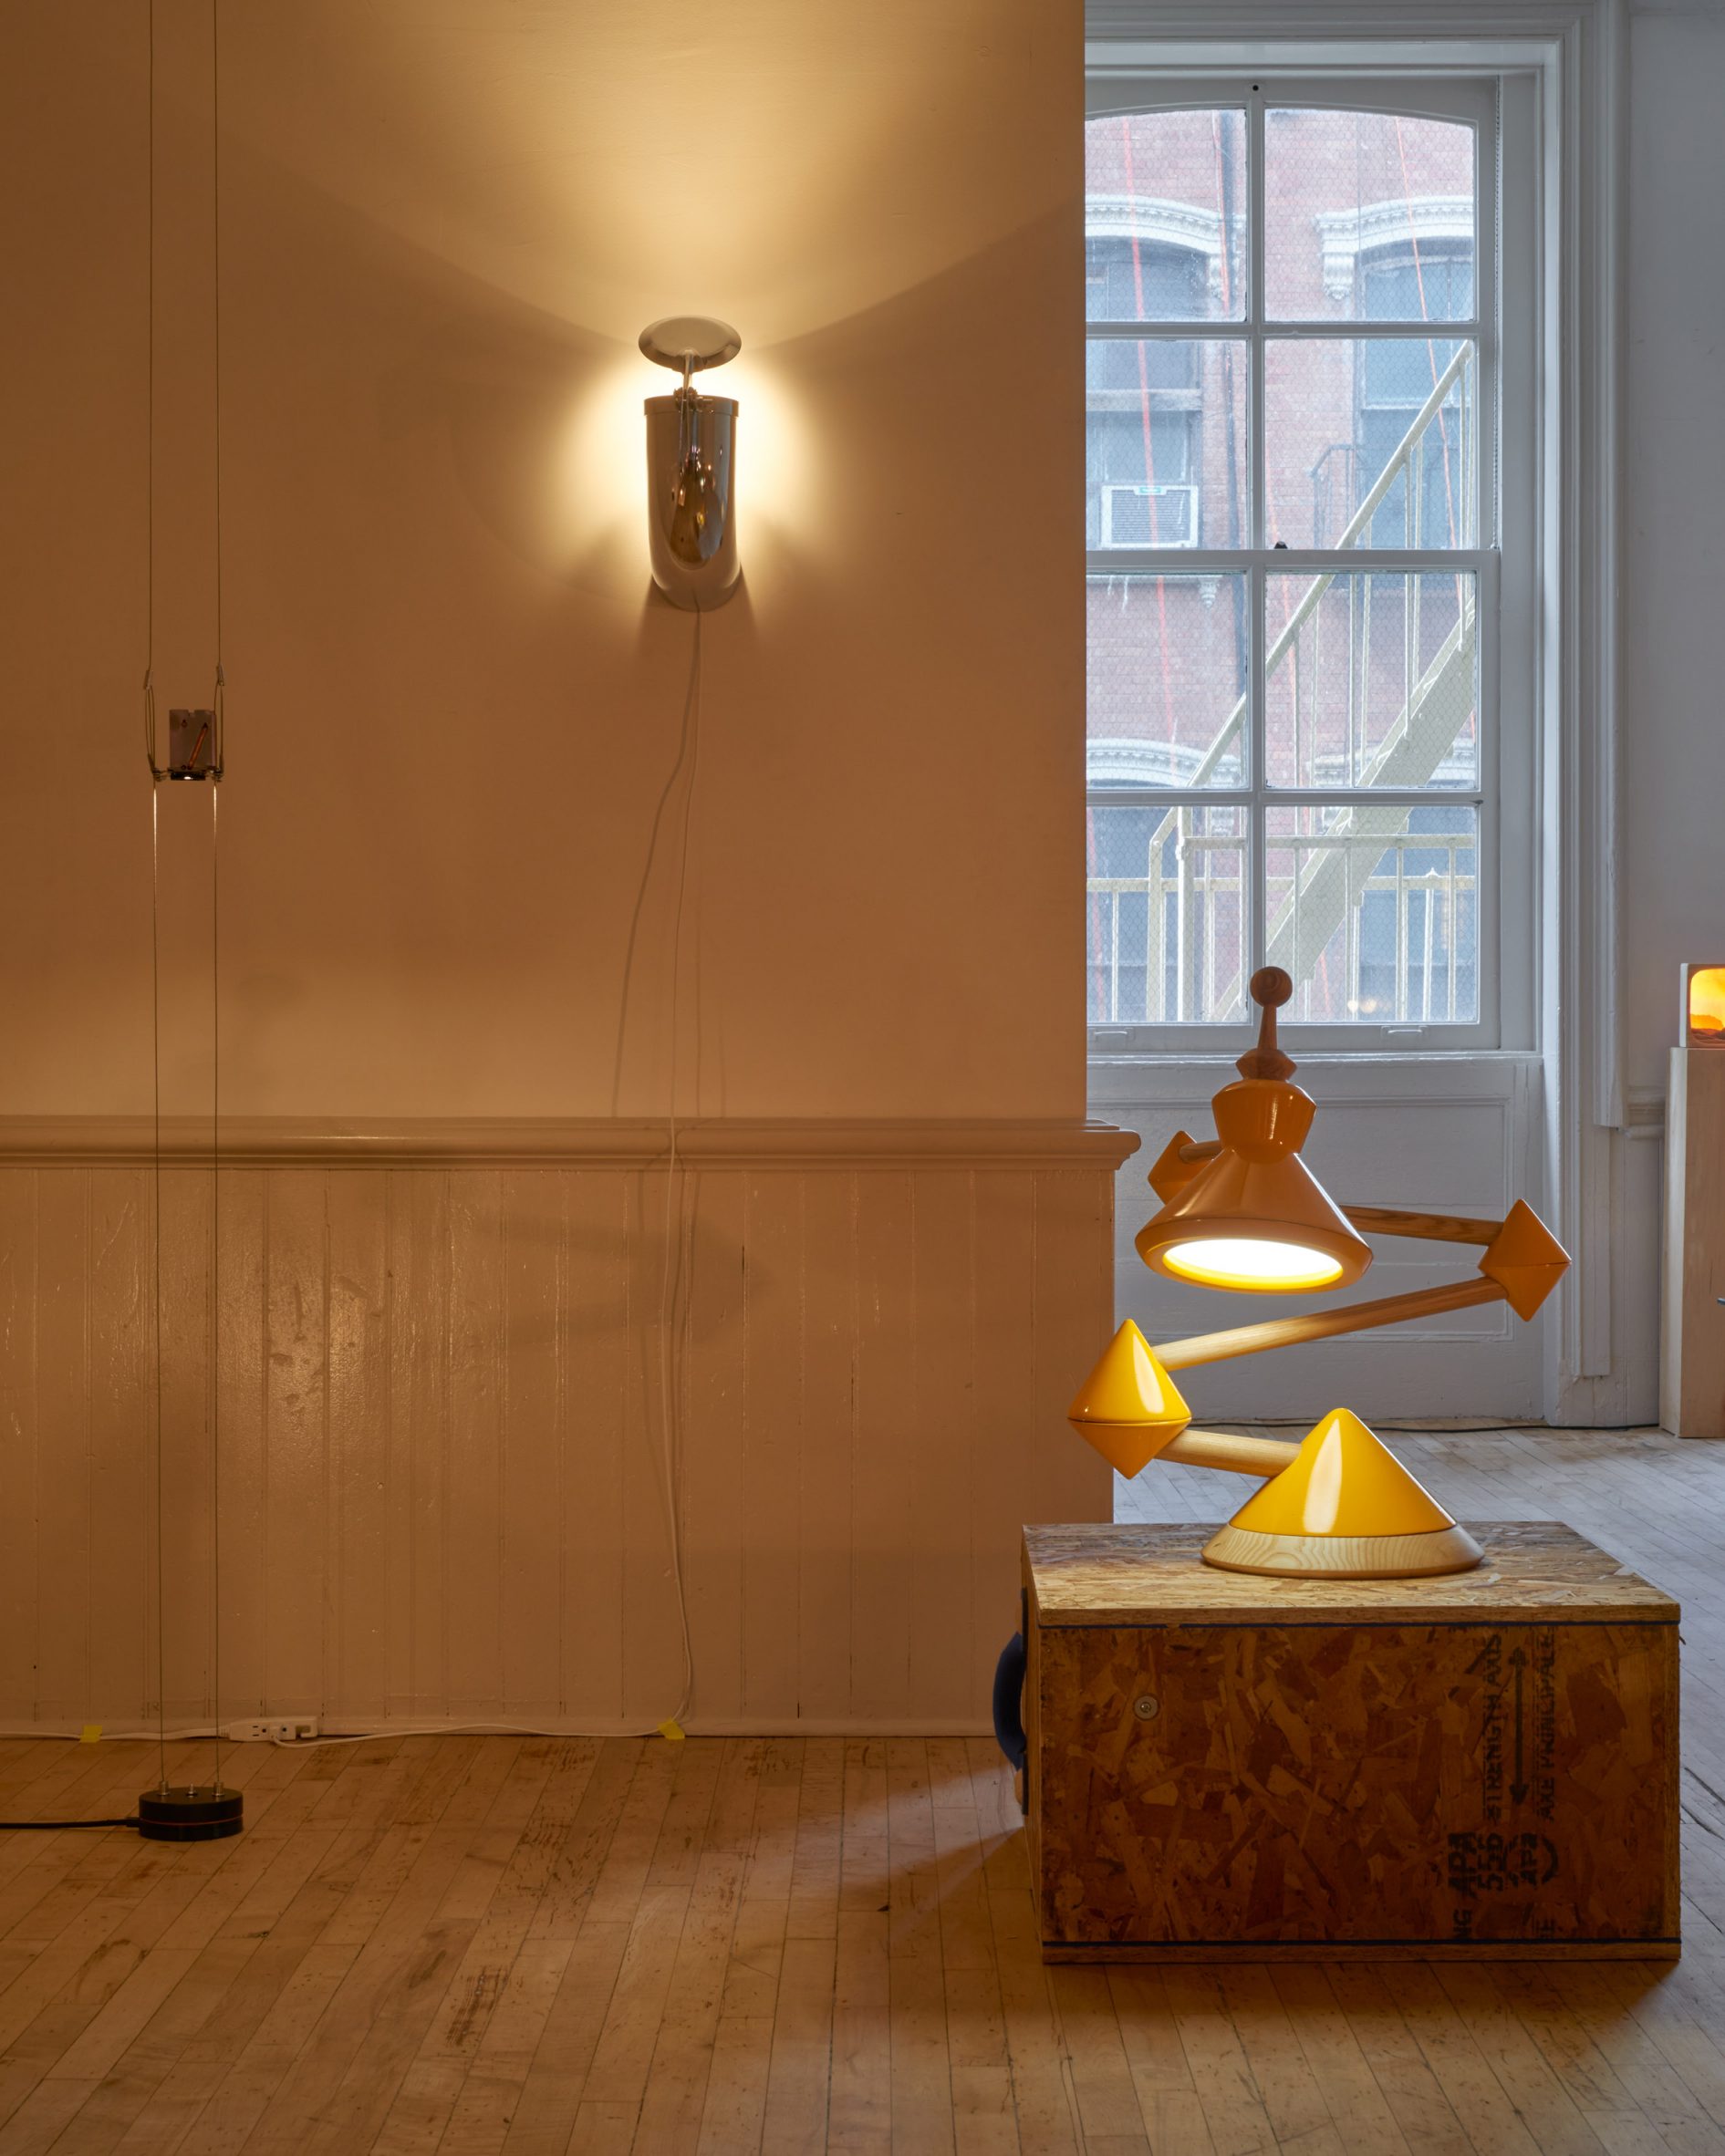 Collection of lamps during Head Hi show in Soho Loft